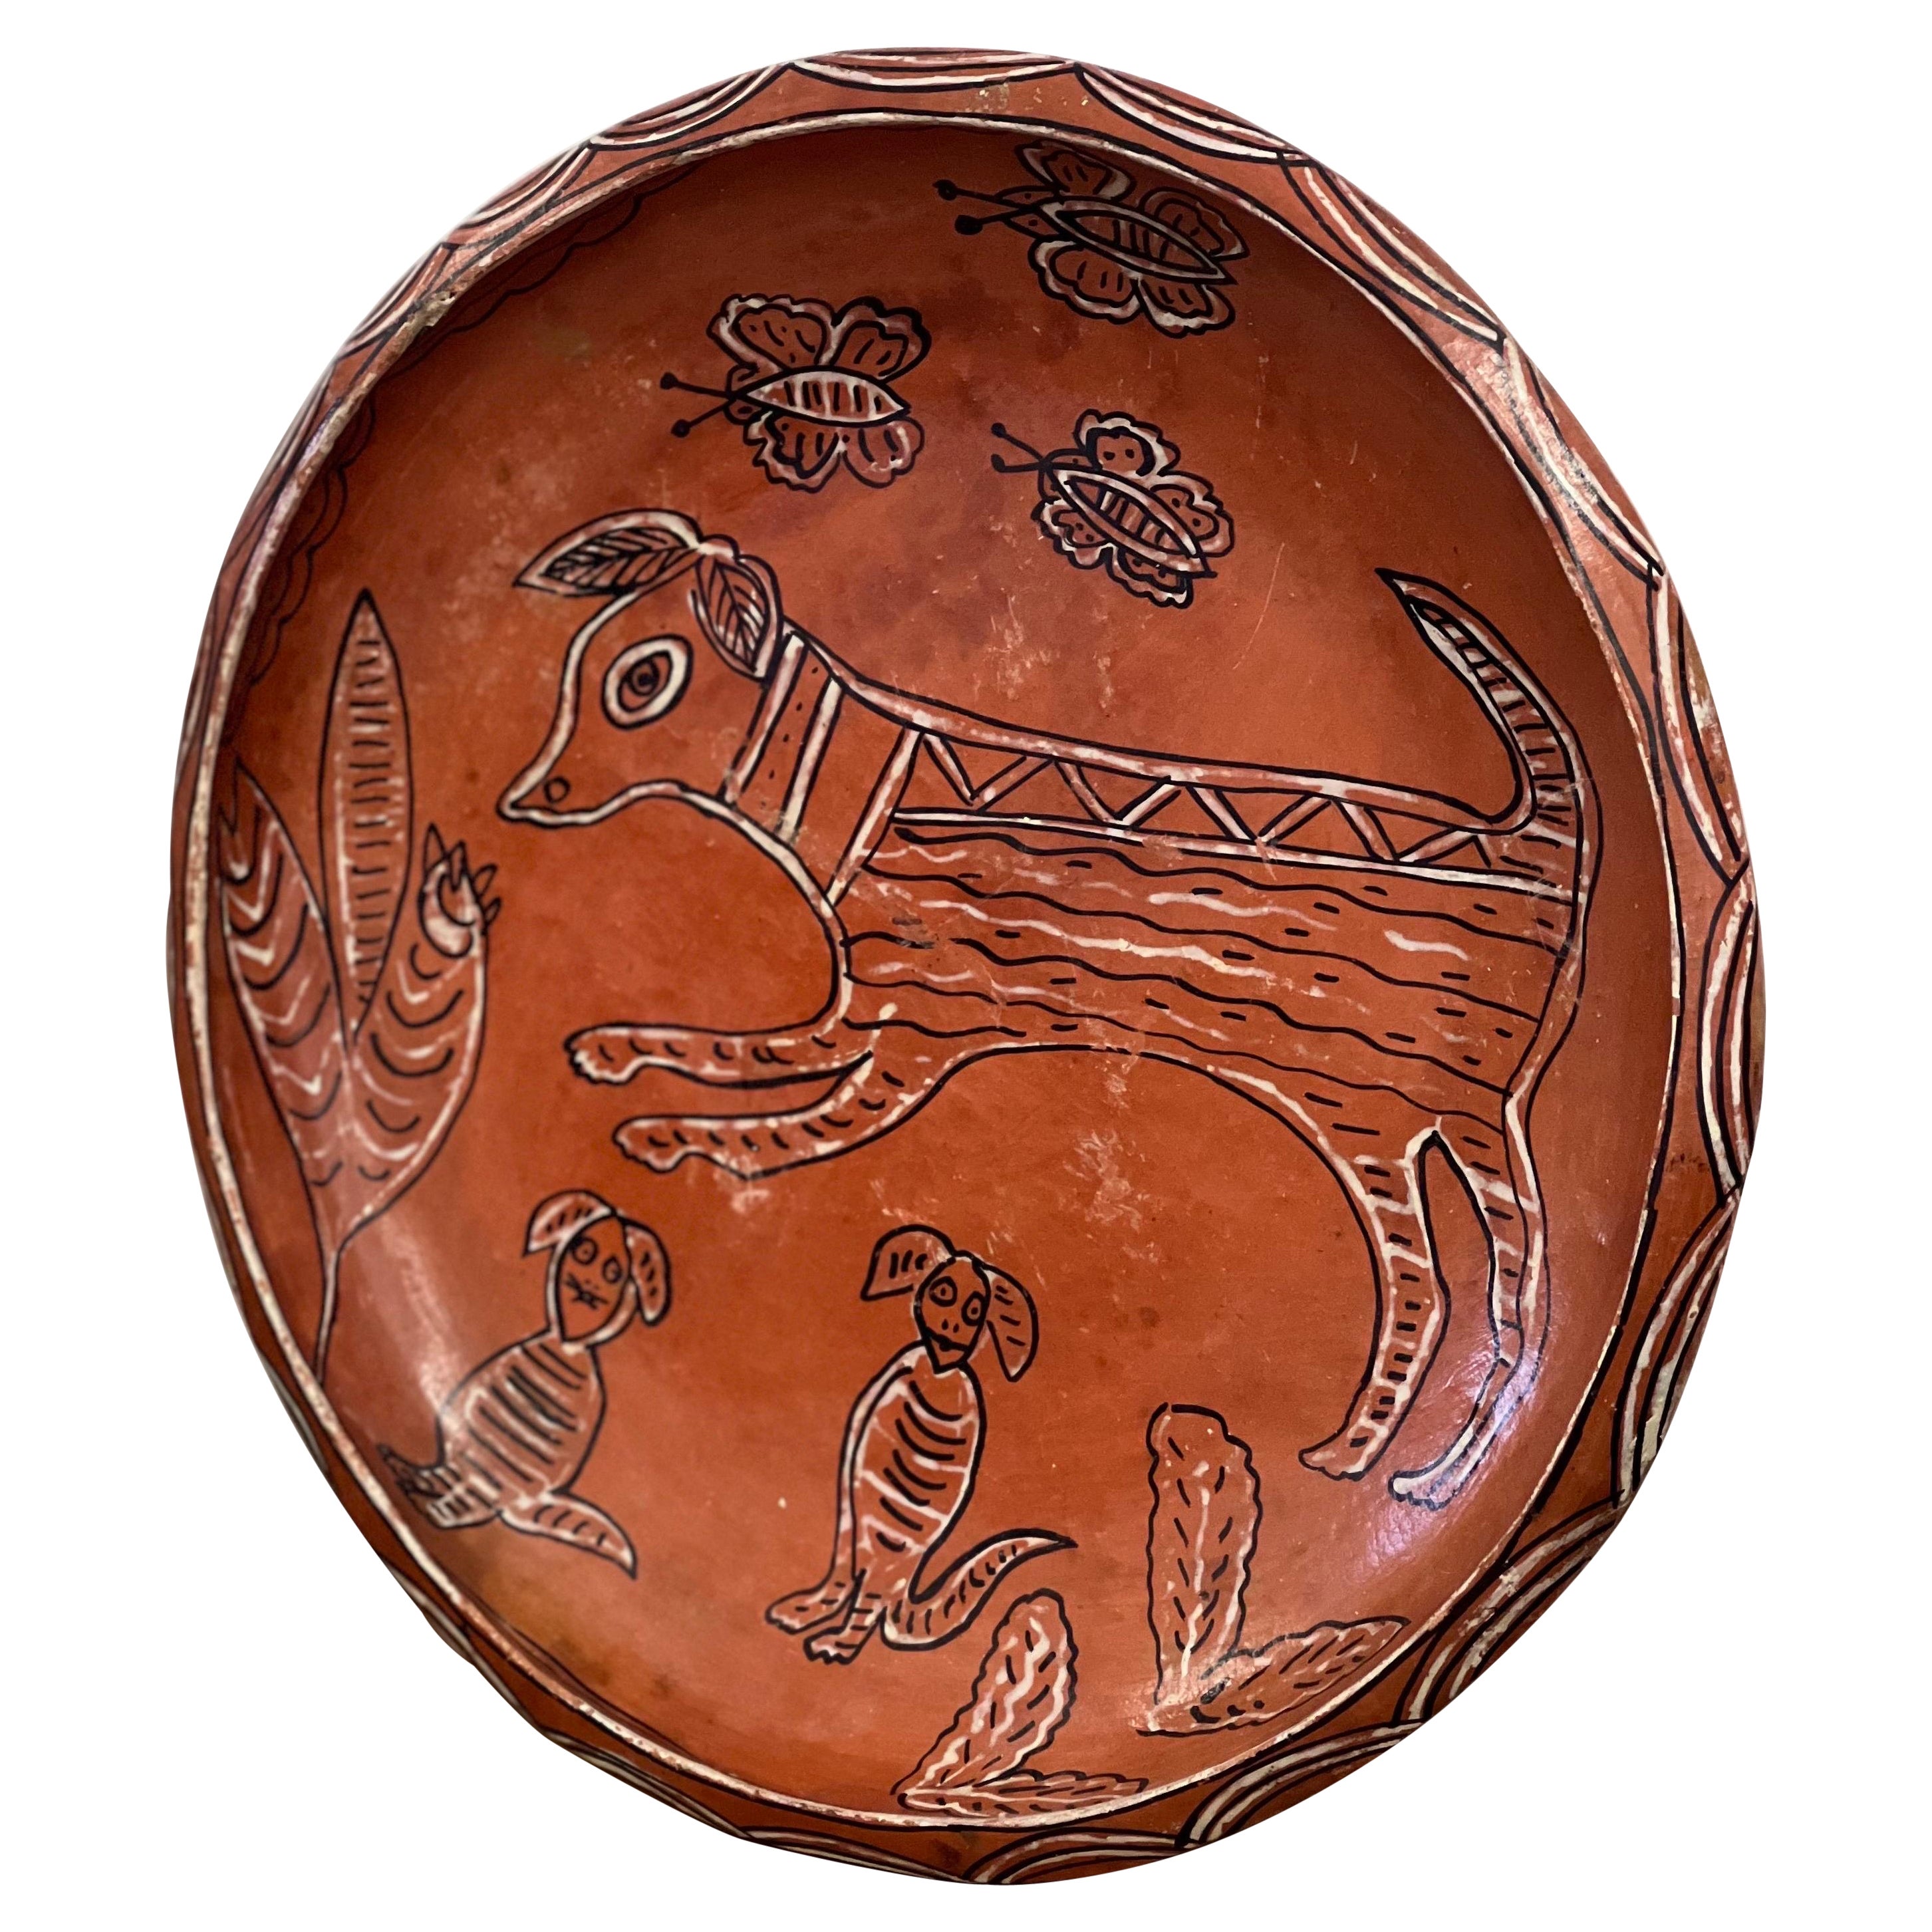 Vintage Handmade Pottery with Hand Painted Animal  Motif in a Terracotta Color